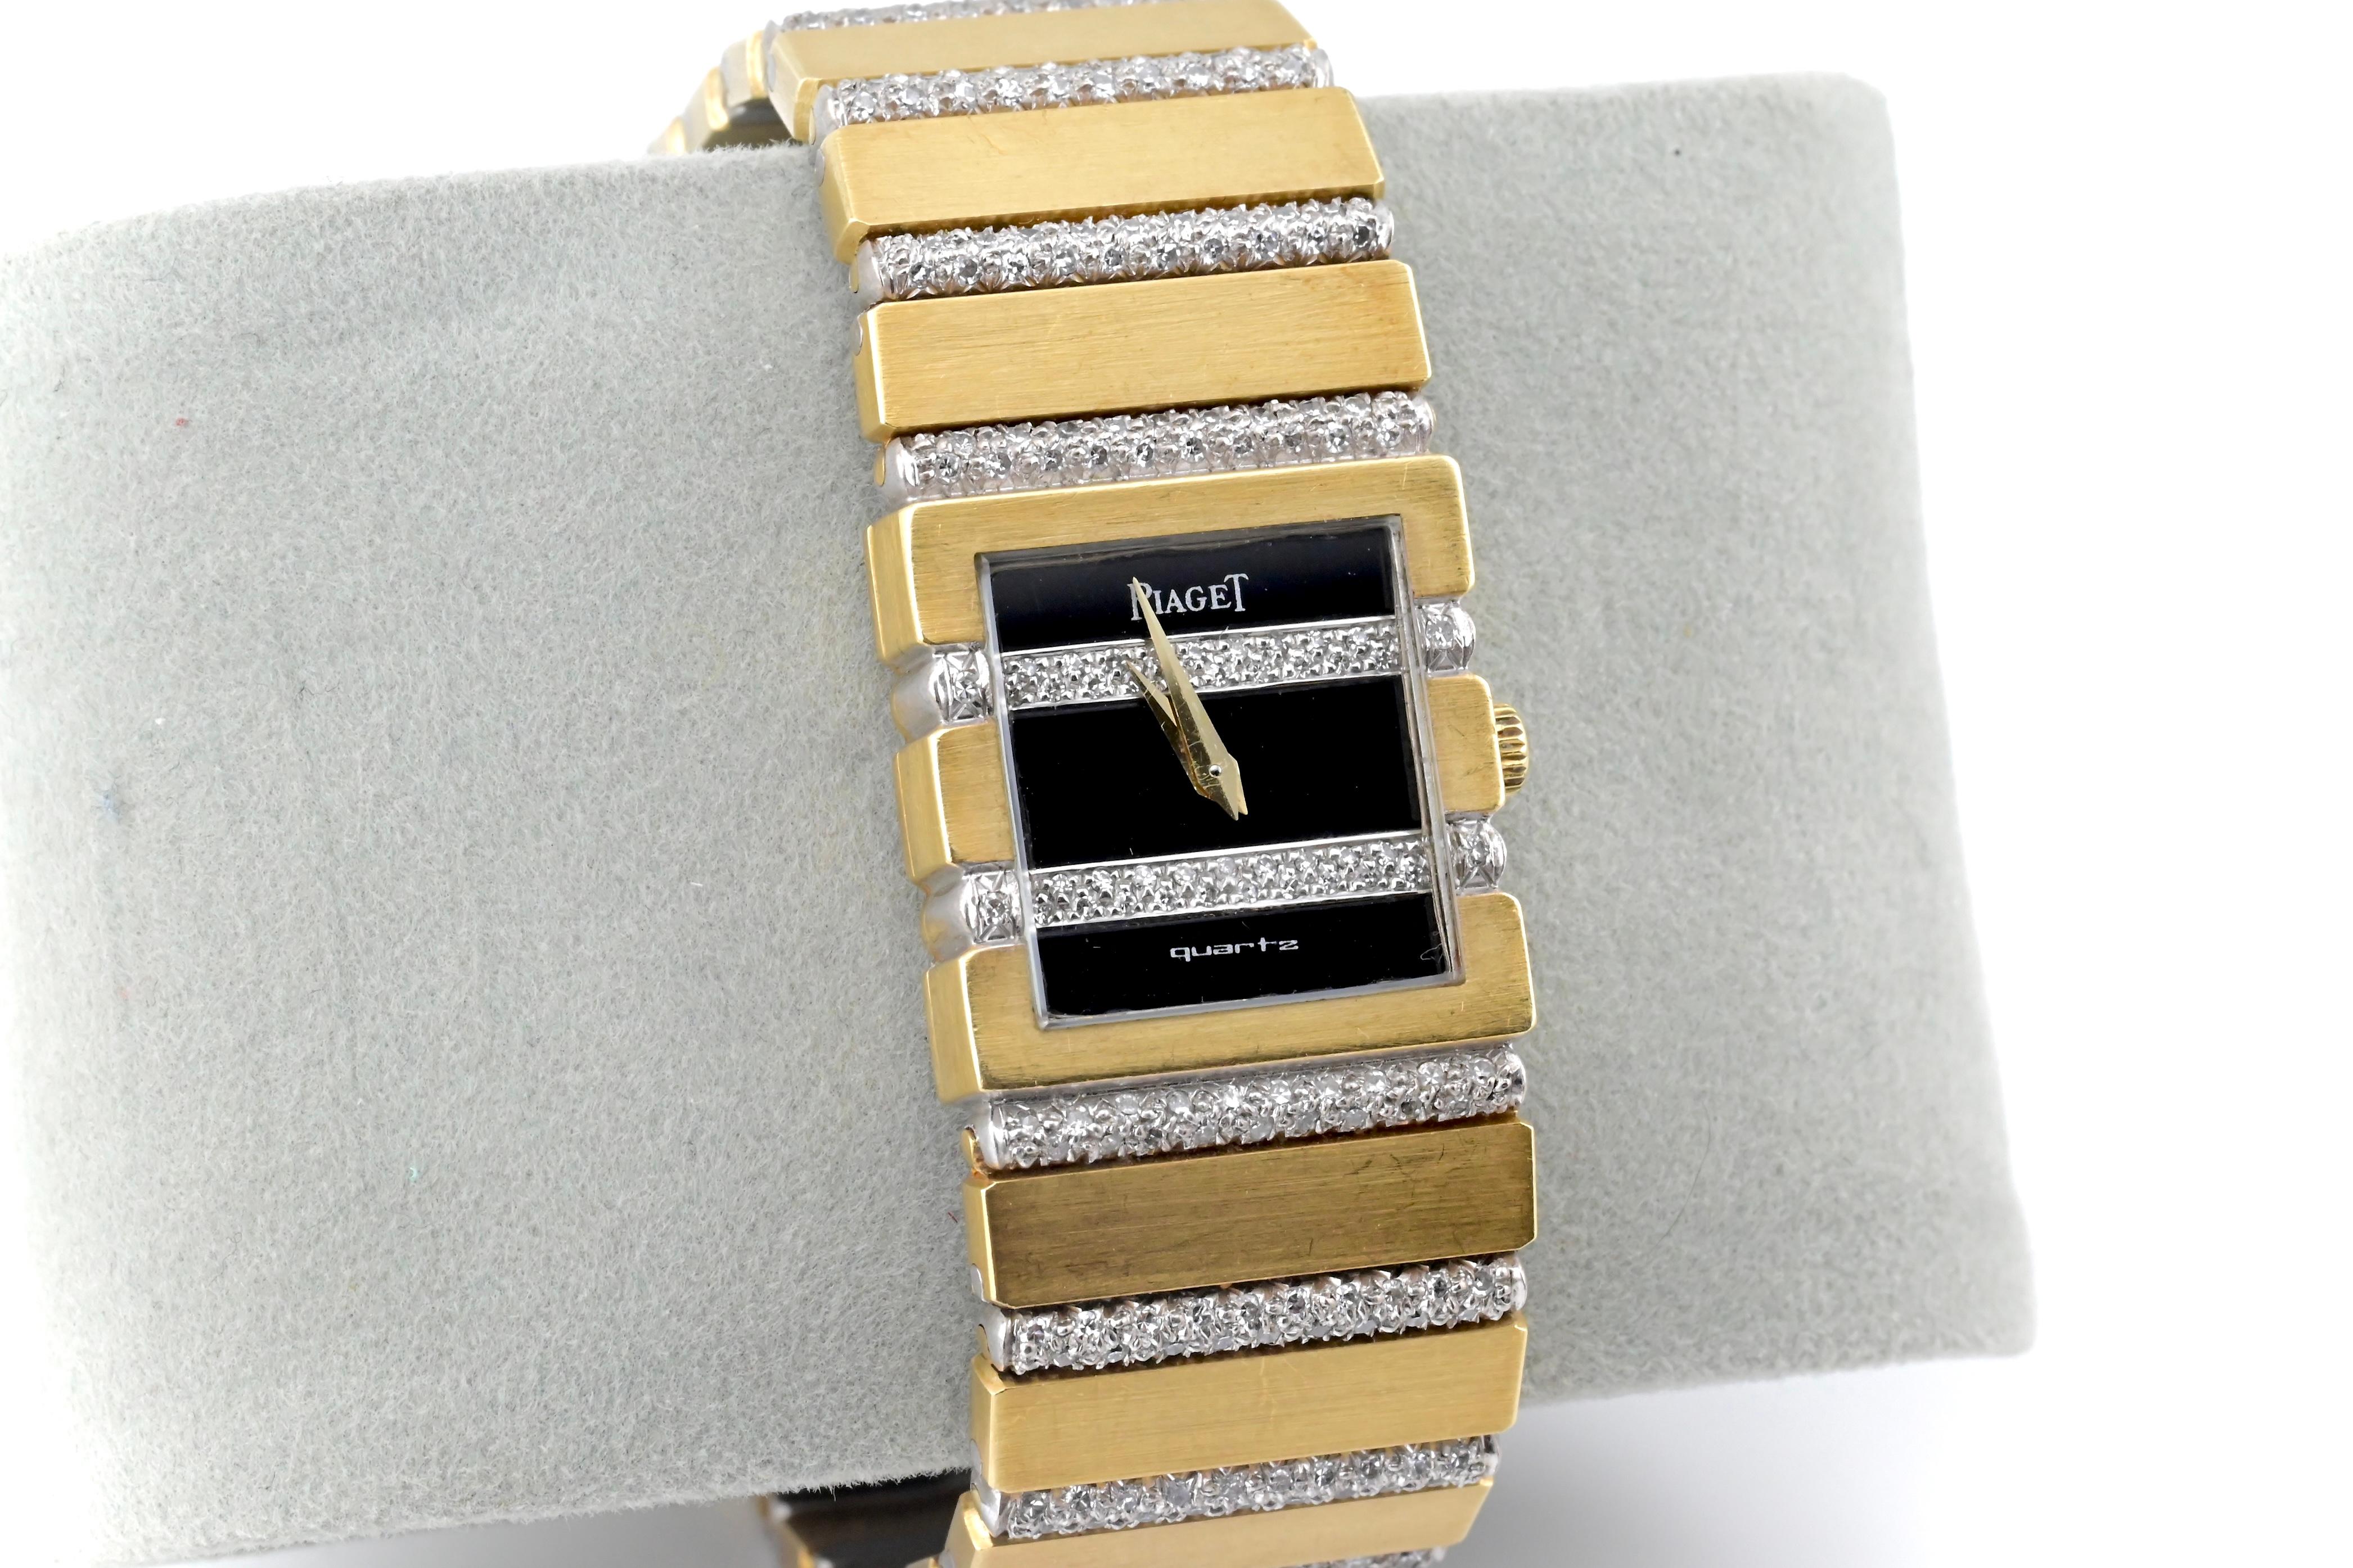 This is a stunning Piaget polo 18k solid yellow gold ladies wristwatch with a black diamond dial & diamonds encrusted in an alternating pattern with the strap. This watch weighs 102 grams, and is 6 6/8 inches in strap length. It has a 21mm diameter.